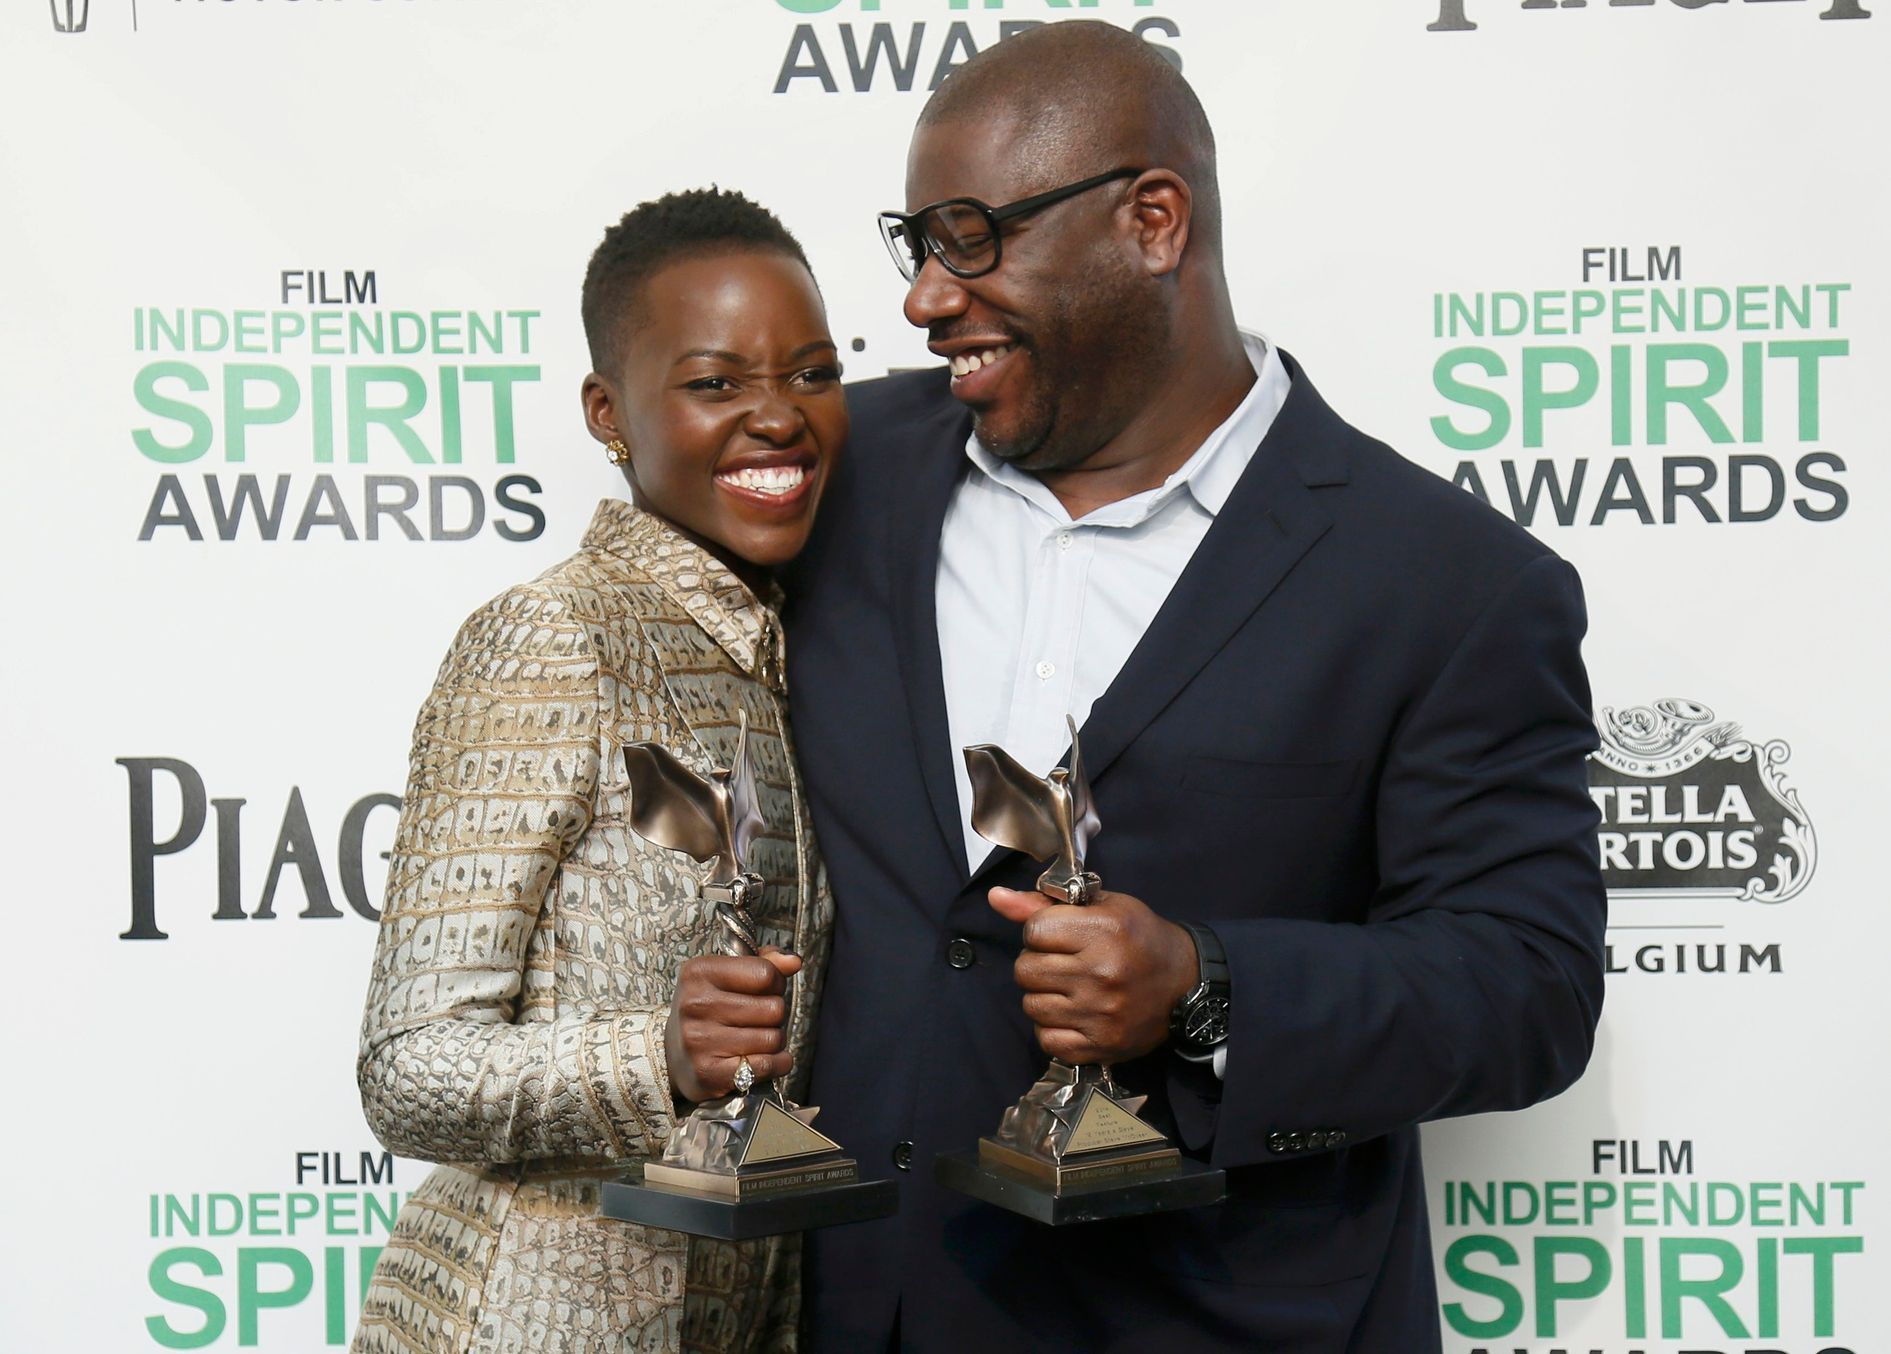 Actress Nyong'o and director McQueen pose with their awards for &quot;12 Years a Slave&quot; backstage at the 2014 Film Independent Spirit Awards in Santa Monica